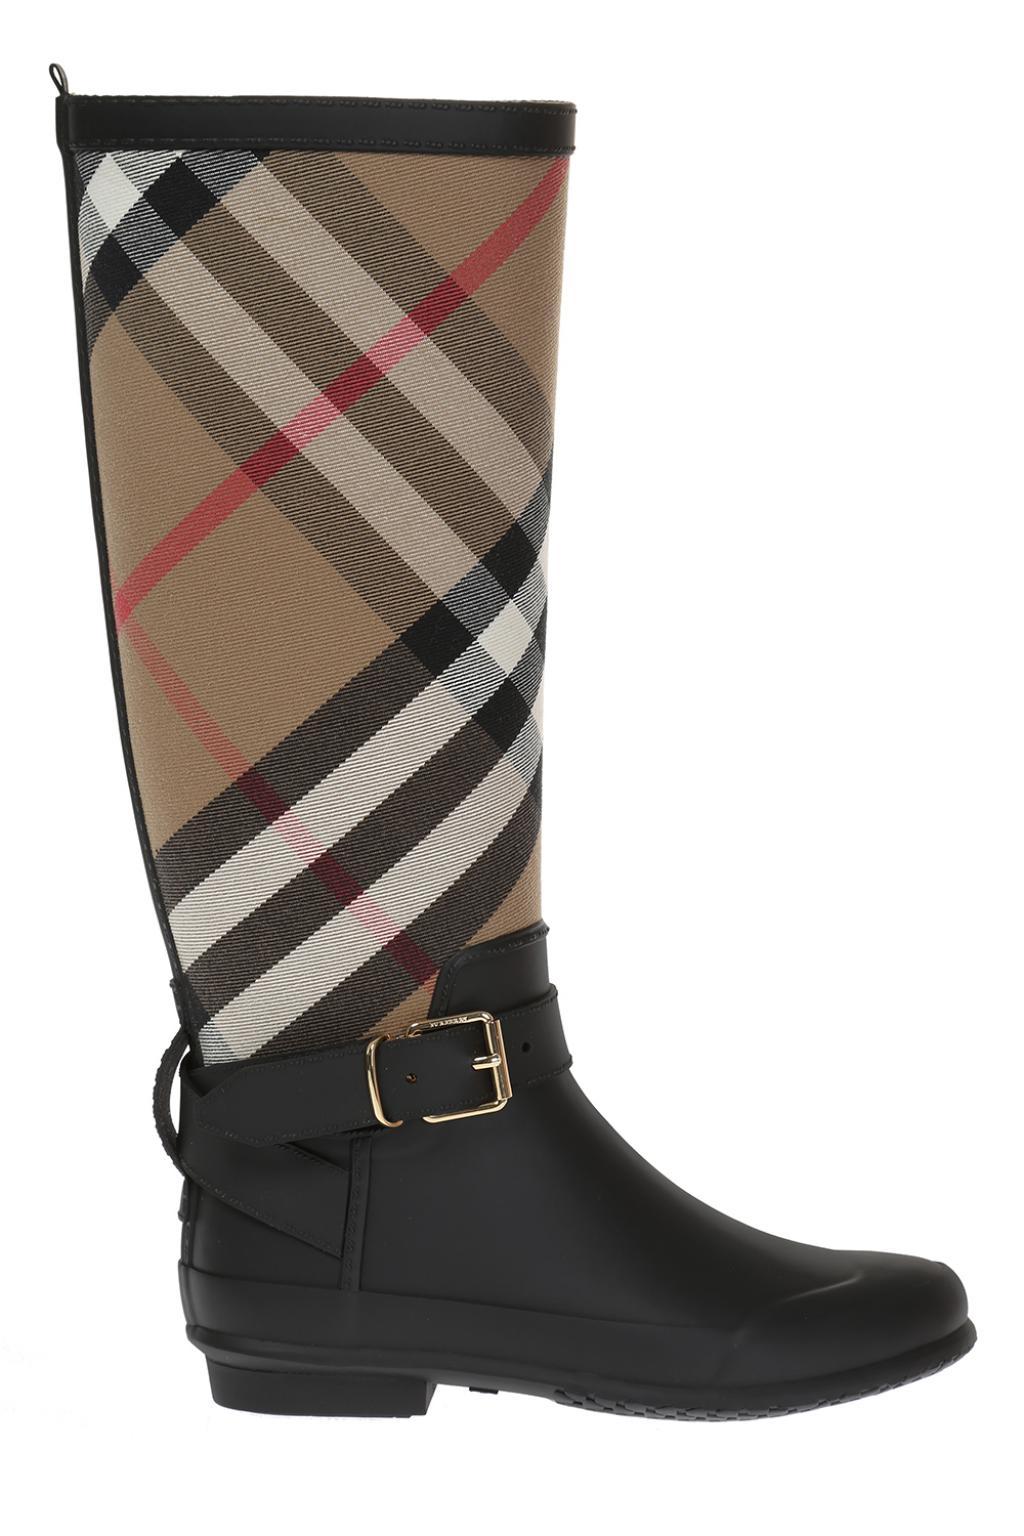 Burberry Rubber 'simeon' Checked Rain Boots in Brown - Lyst